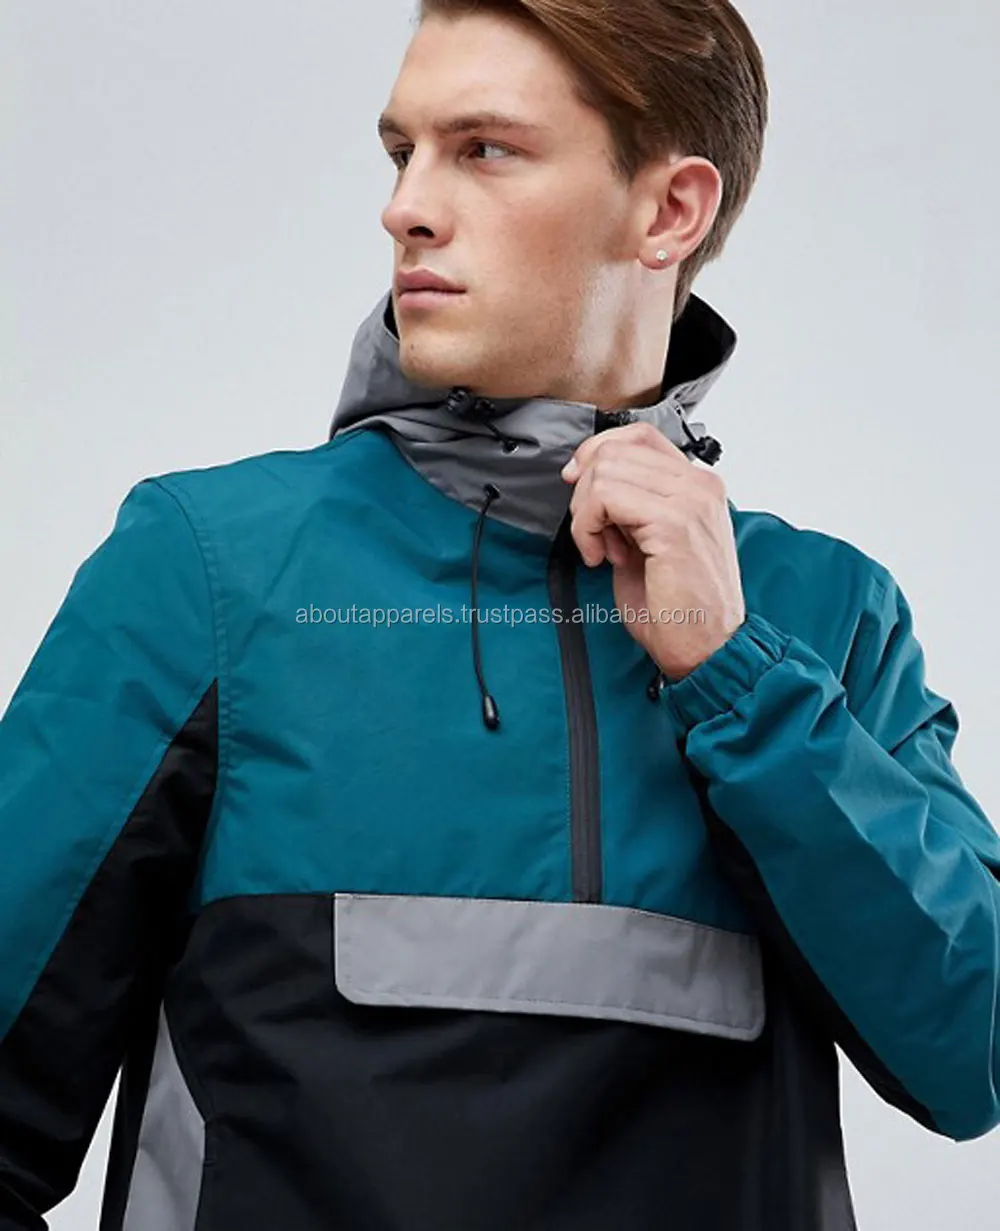 Overhead Windbreaker Jacket In Black With Reflective Sleeves Wholesale  Manufacturer & Exporters Textile & Fashion Leather Clothing Goods with we  have provide customization Brand your own